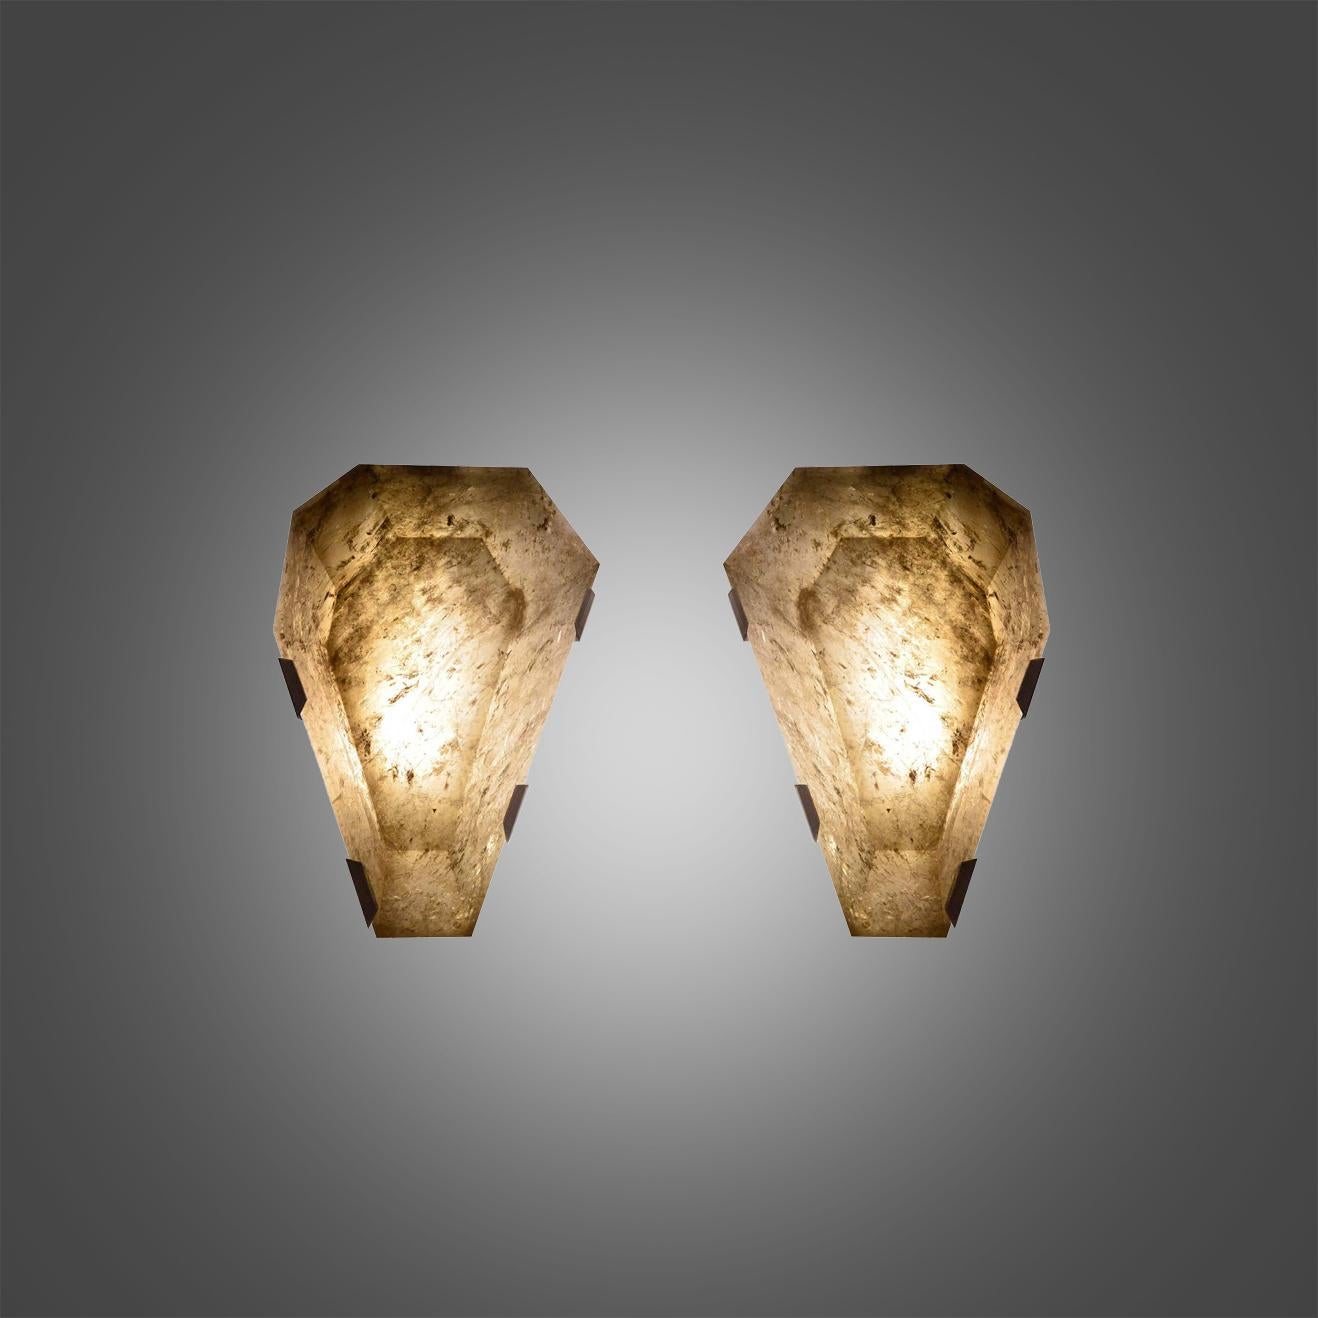 Pair of fine carved diamond form smoky rock crystal sconces with brass mounts. Created by Phoenix Gallery, NYC.
Each sconce installed two sockets, use candelabra lightbulbs, 120W total
Custom size and metal finish upon request.